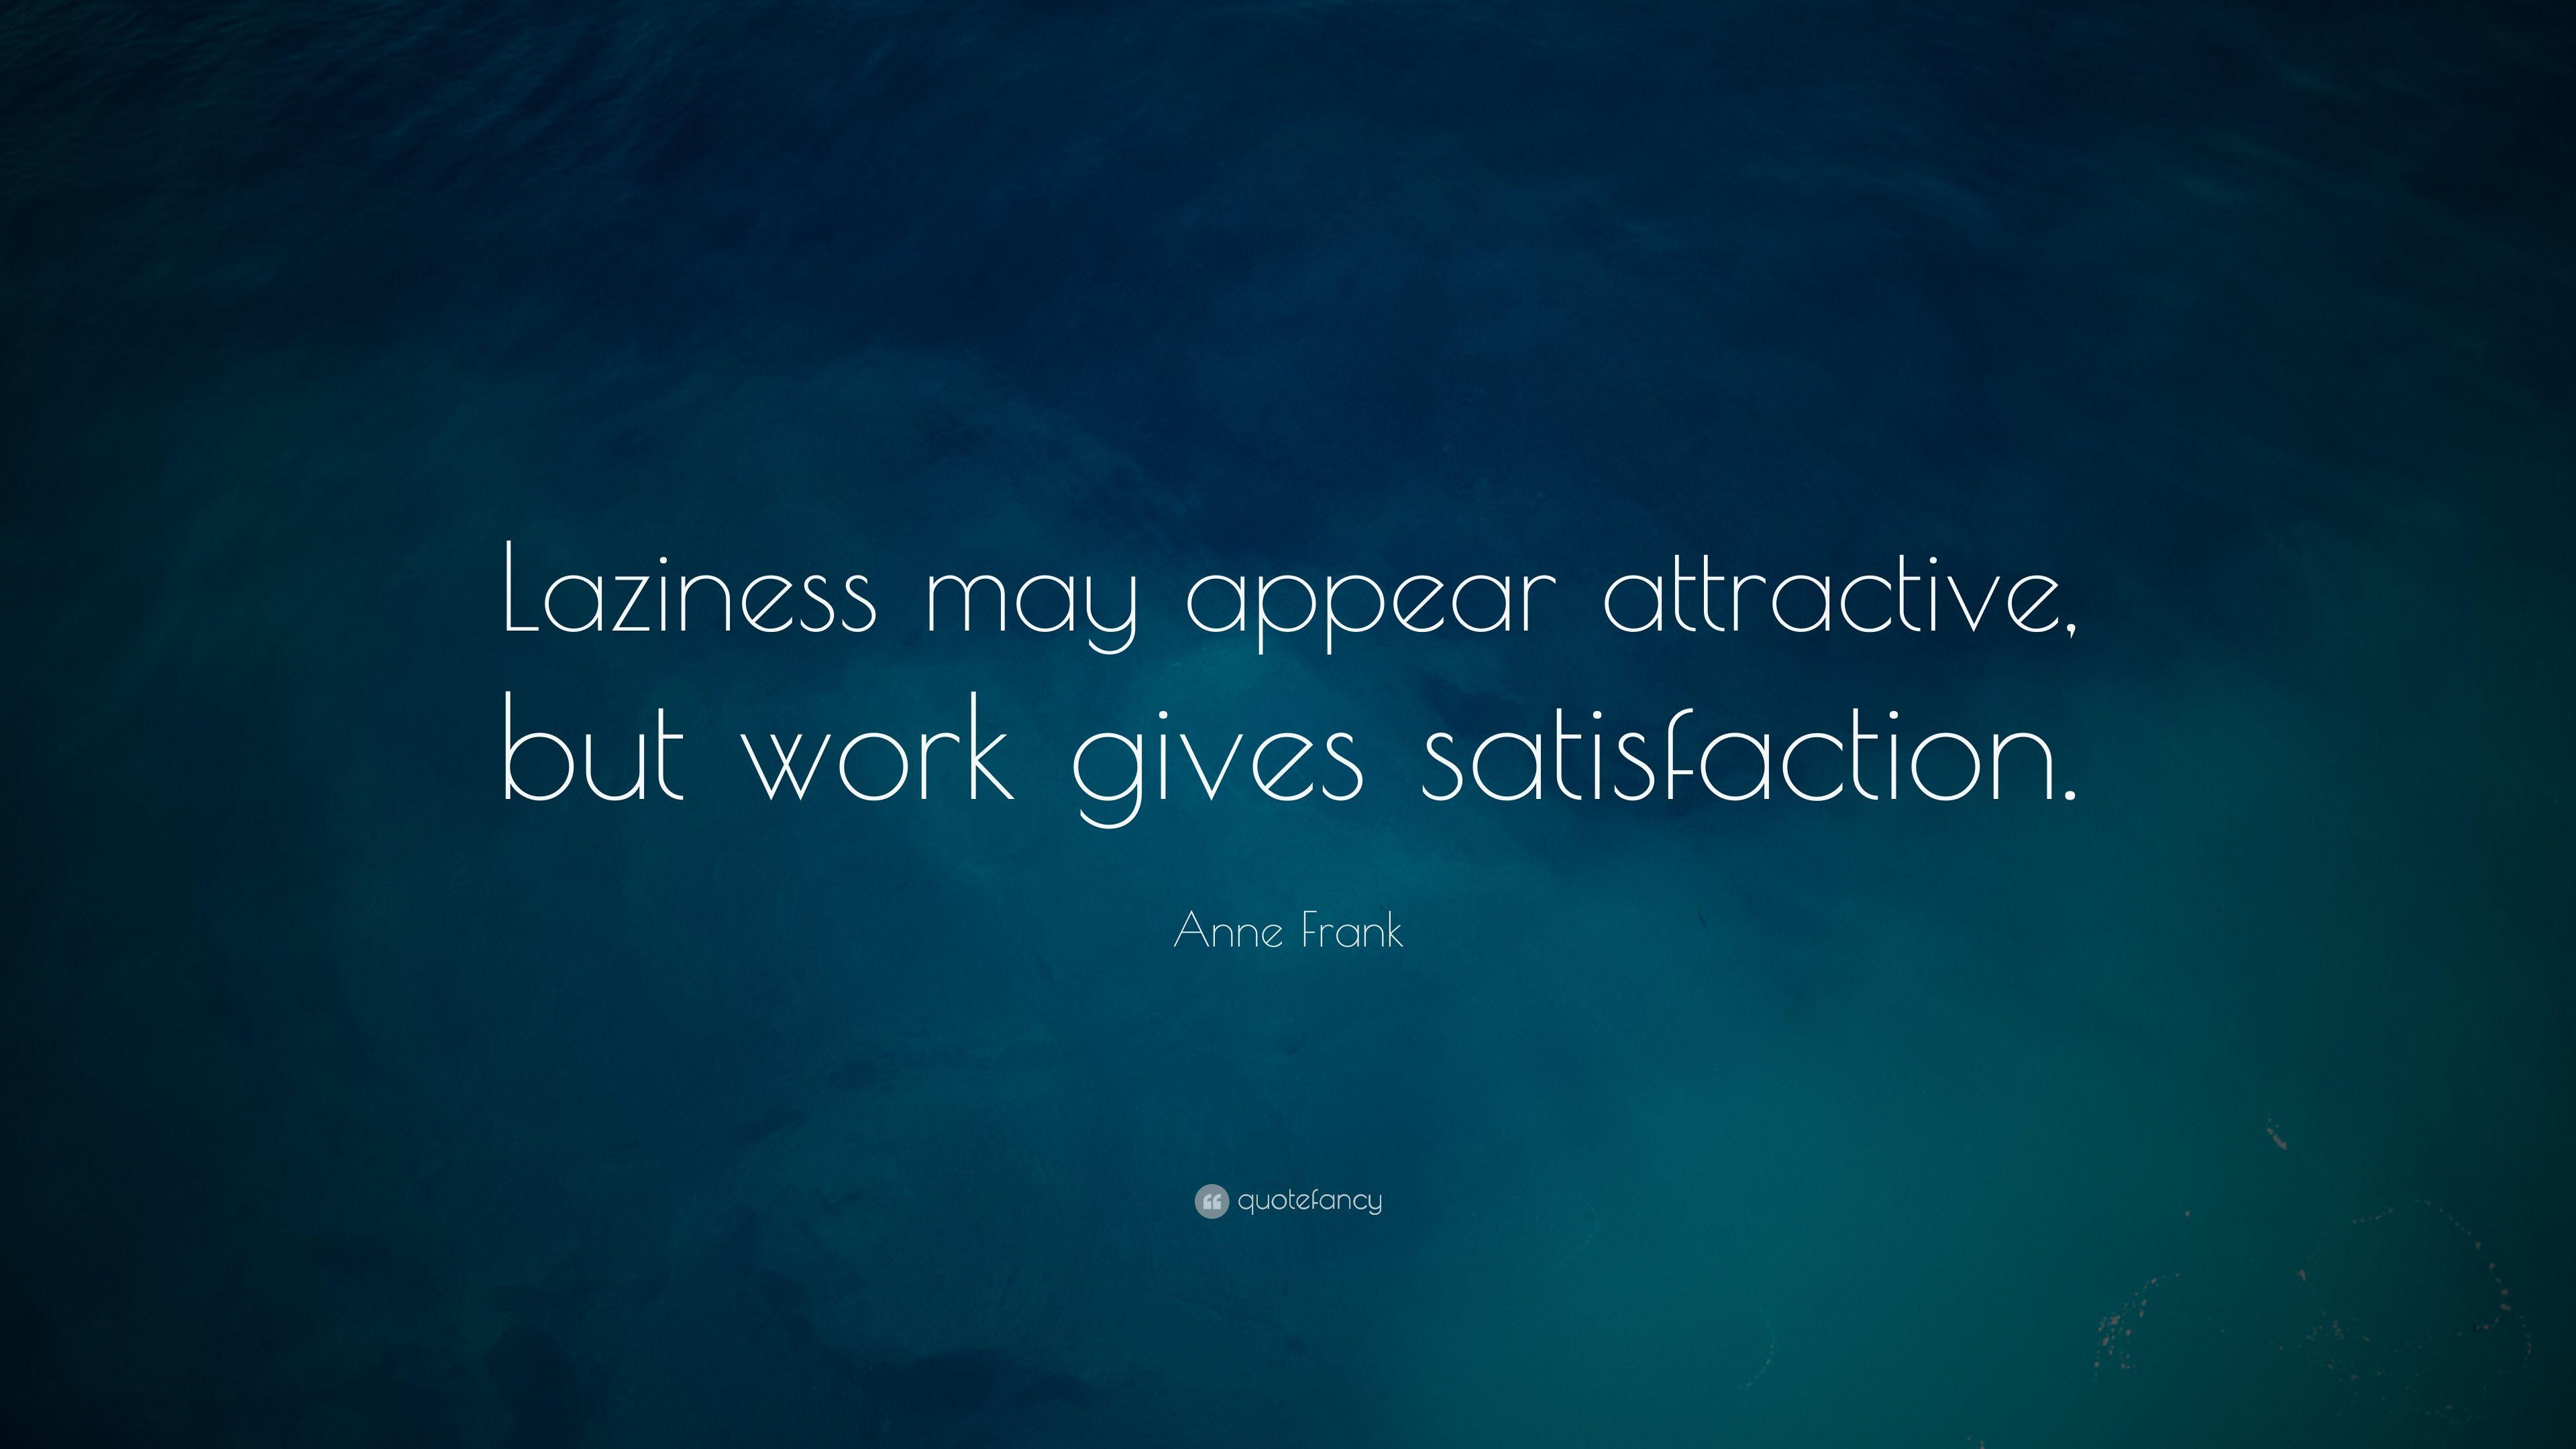 Anne Frank Quote: “Laziness may appear attractive, but work gives